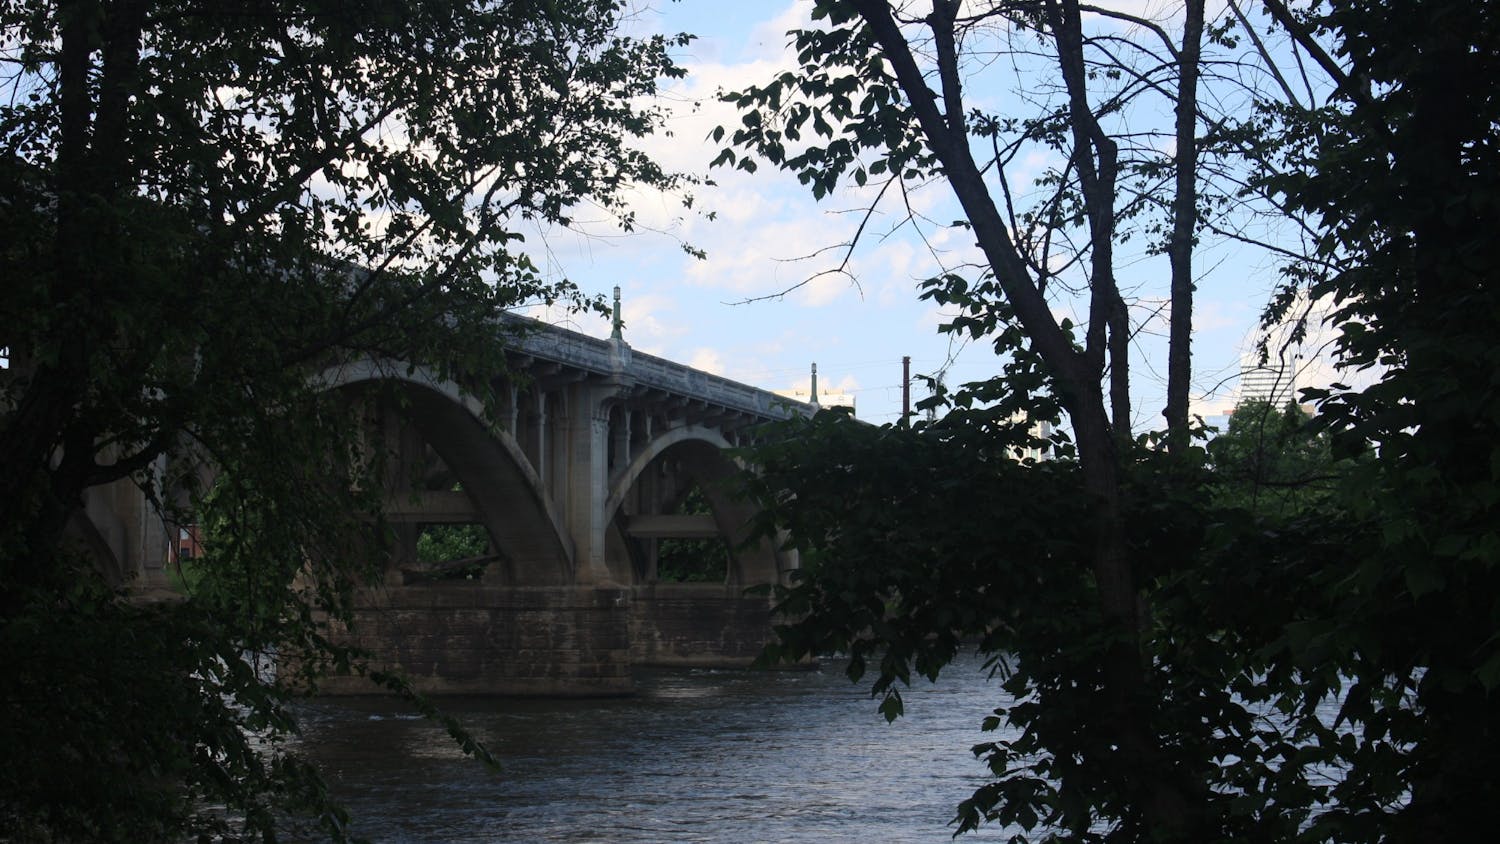 The Gervais Street Bridge crossing the Congaree River on May 27, 2022. The bridge stands right next to West Columbia Riverwalk Park.